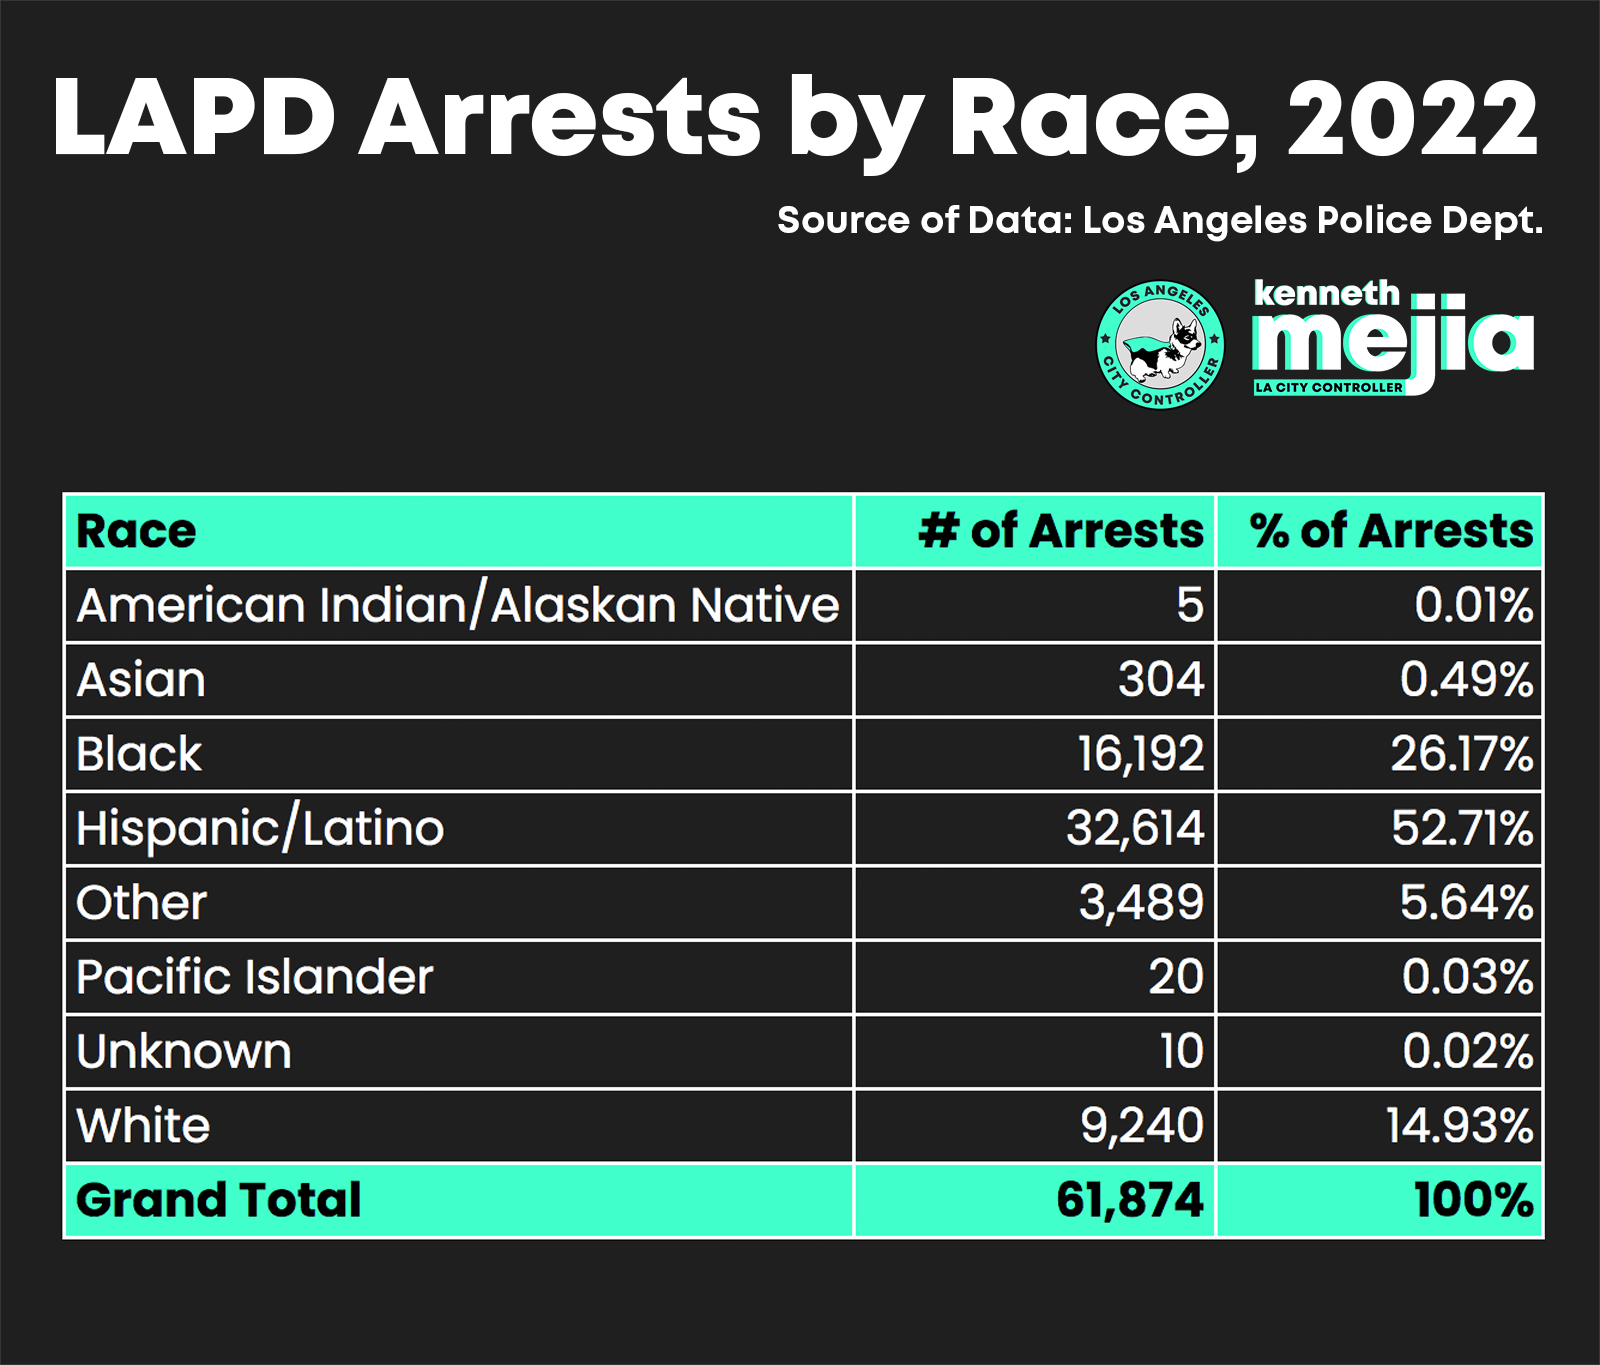 A bar chart of LAPD Arrests by Council District, 2022. There are still fewer arrests overall compared to 2019. There are 15 Council Districts. Council Districts 14, 8, and 1 have the highest number of arrests, at around 5,000 to 6,000  arrests,  and are also fairly close in number of arrests to districts 6, 9,  11, and 13 which are also close to 5,000 arrests. The rest of the Council Districts havemuch fewer than 5,000  arrests. CDs 4 and 5 have the fewest number of arrests, at under 2,500 arrests each. Source of data is LAPD. 